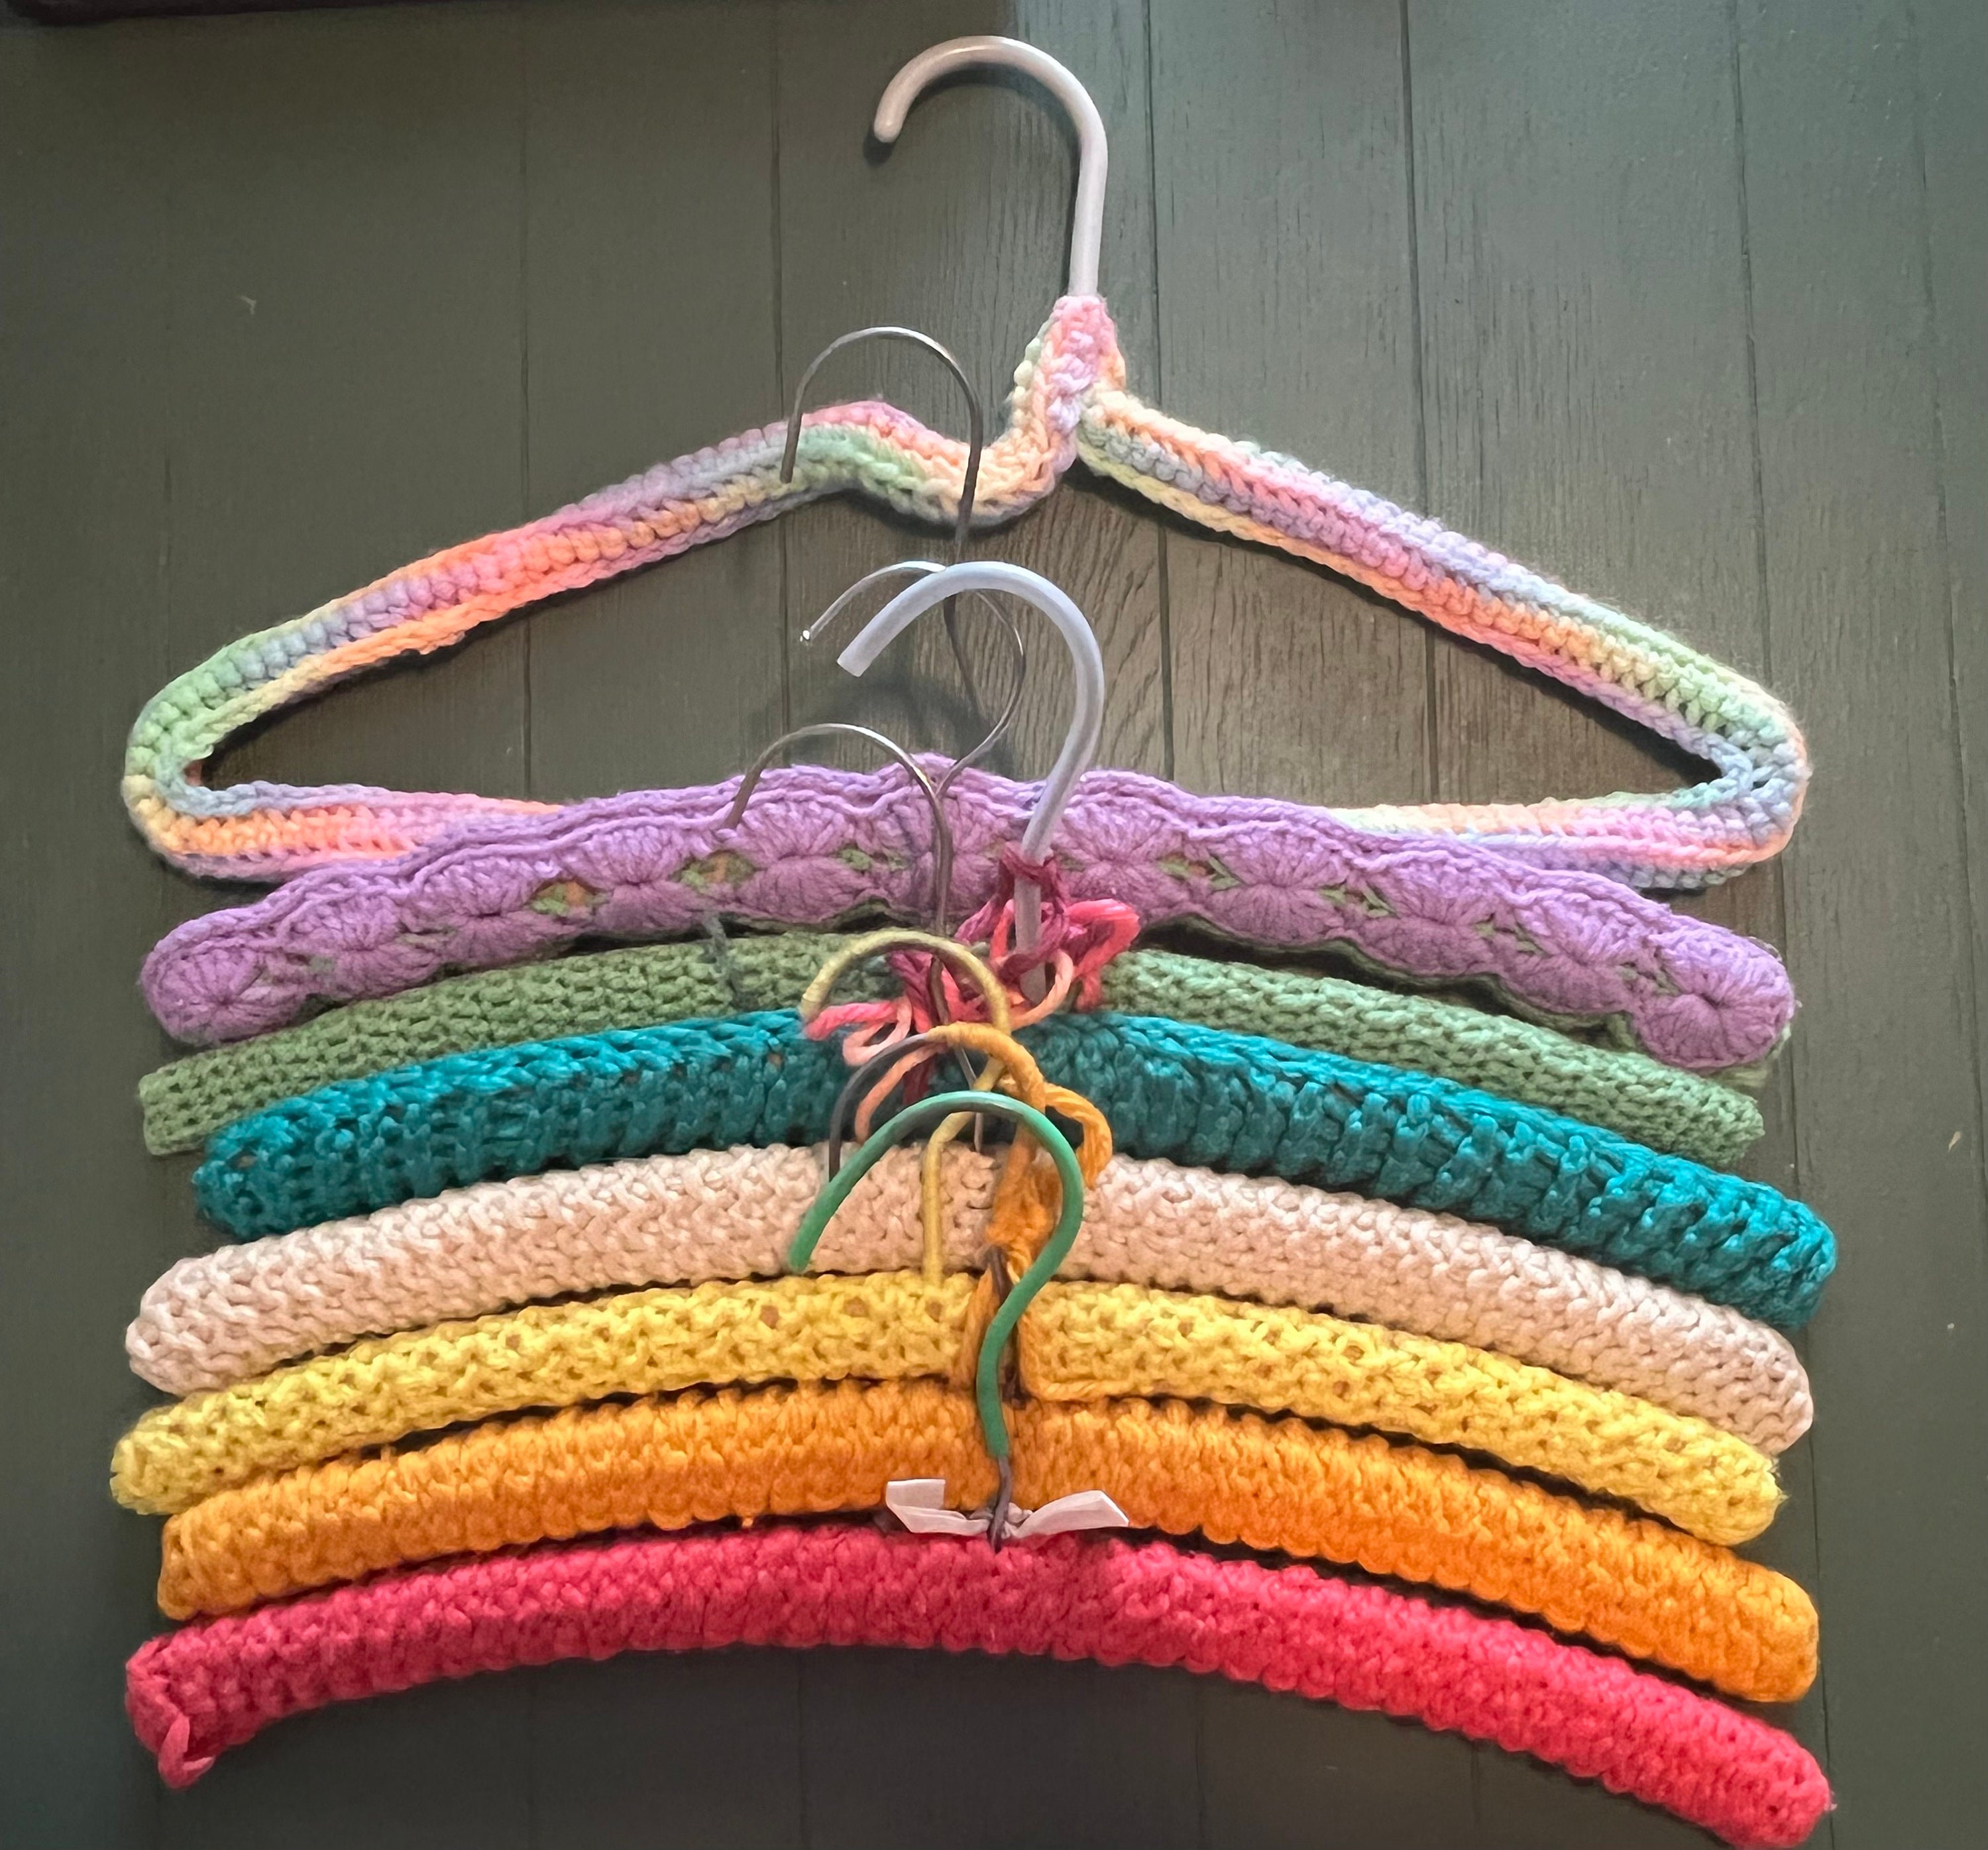 Vintage Boho Hand Crocheted Upcycled Clothes Hangers Yarn Granny